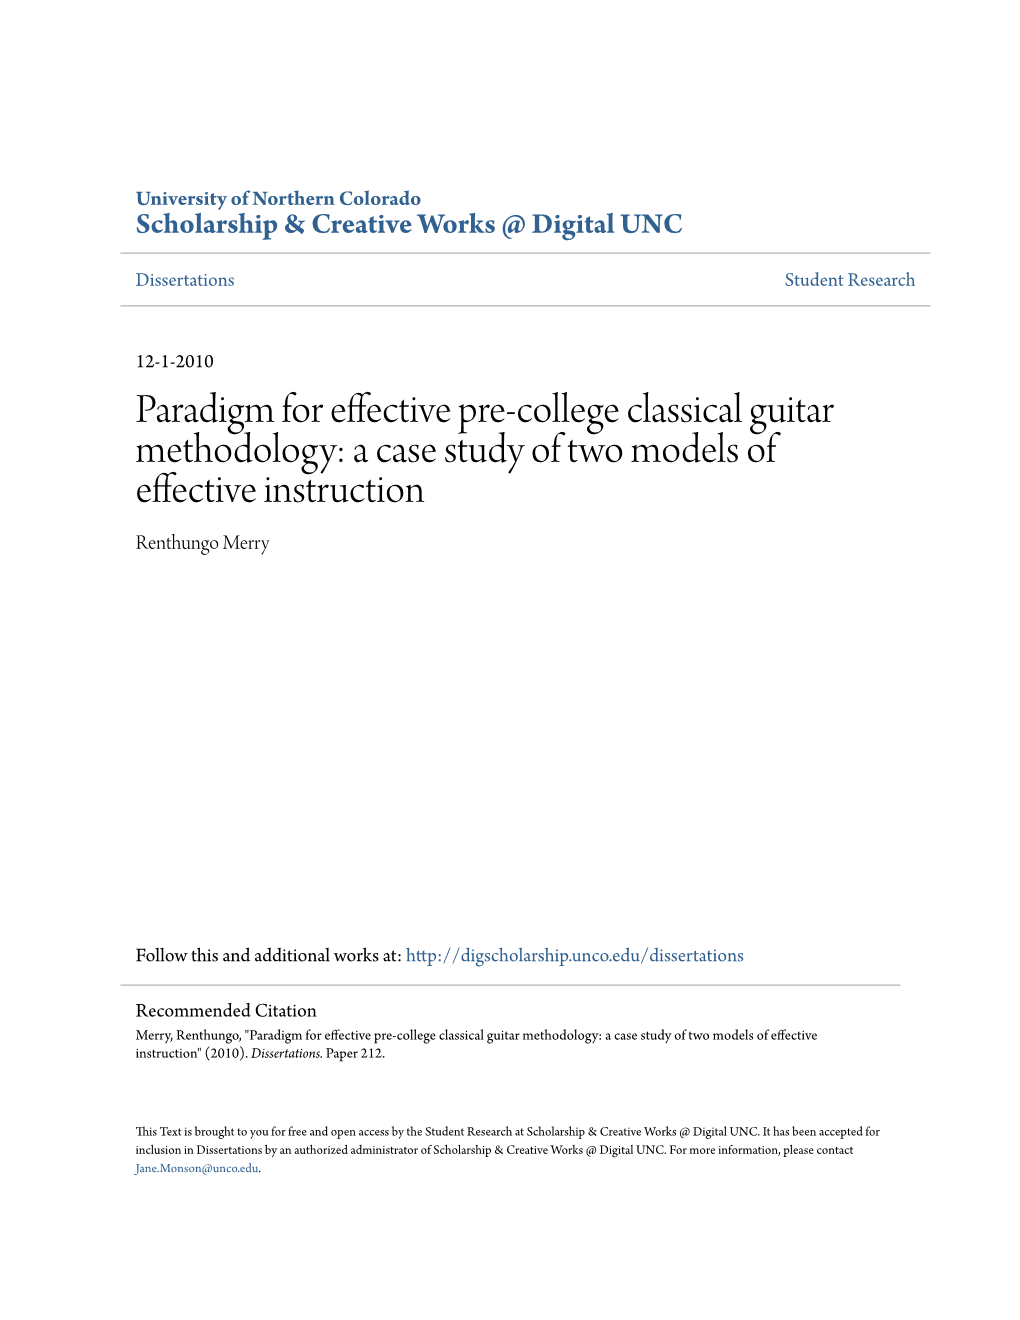 Paradigm for Effective Pre-College Classical Guitar Methodology: a Case Study of Two Models of Effective Instruction Renthungo Merry